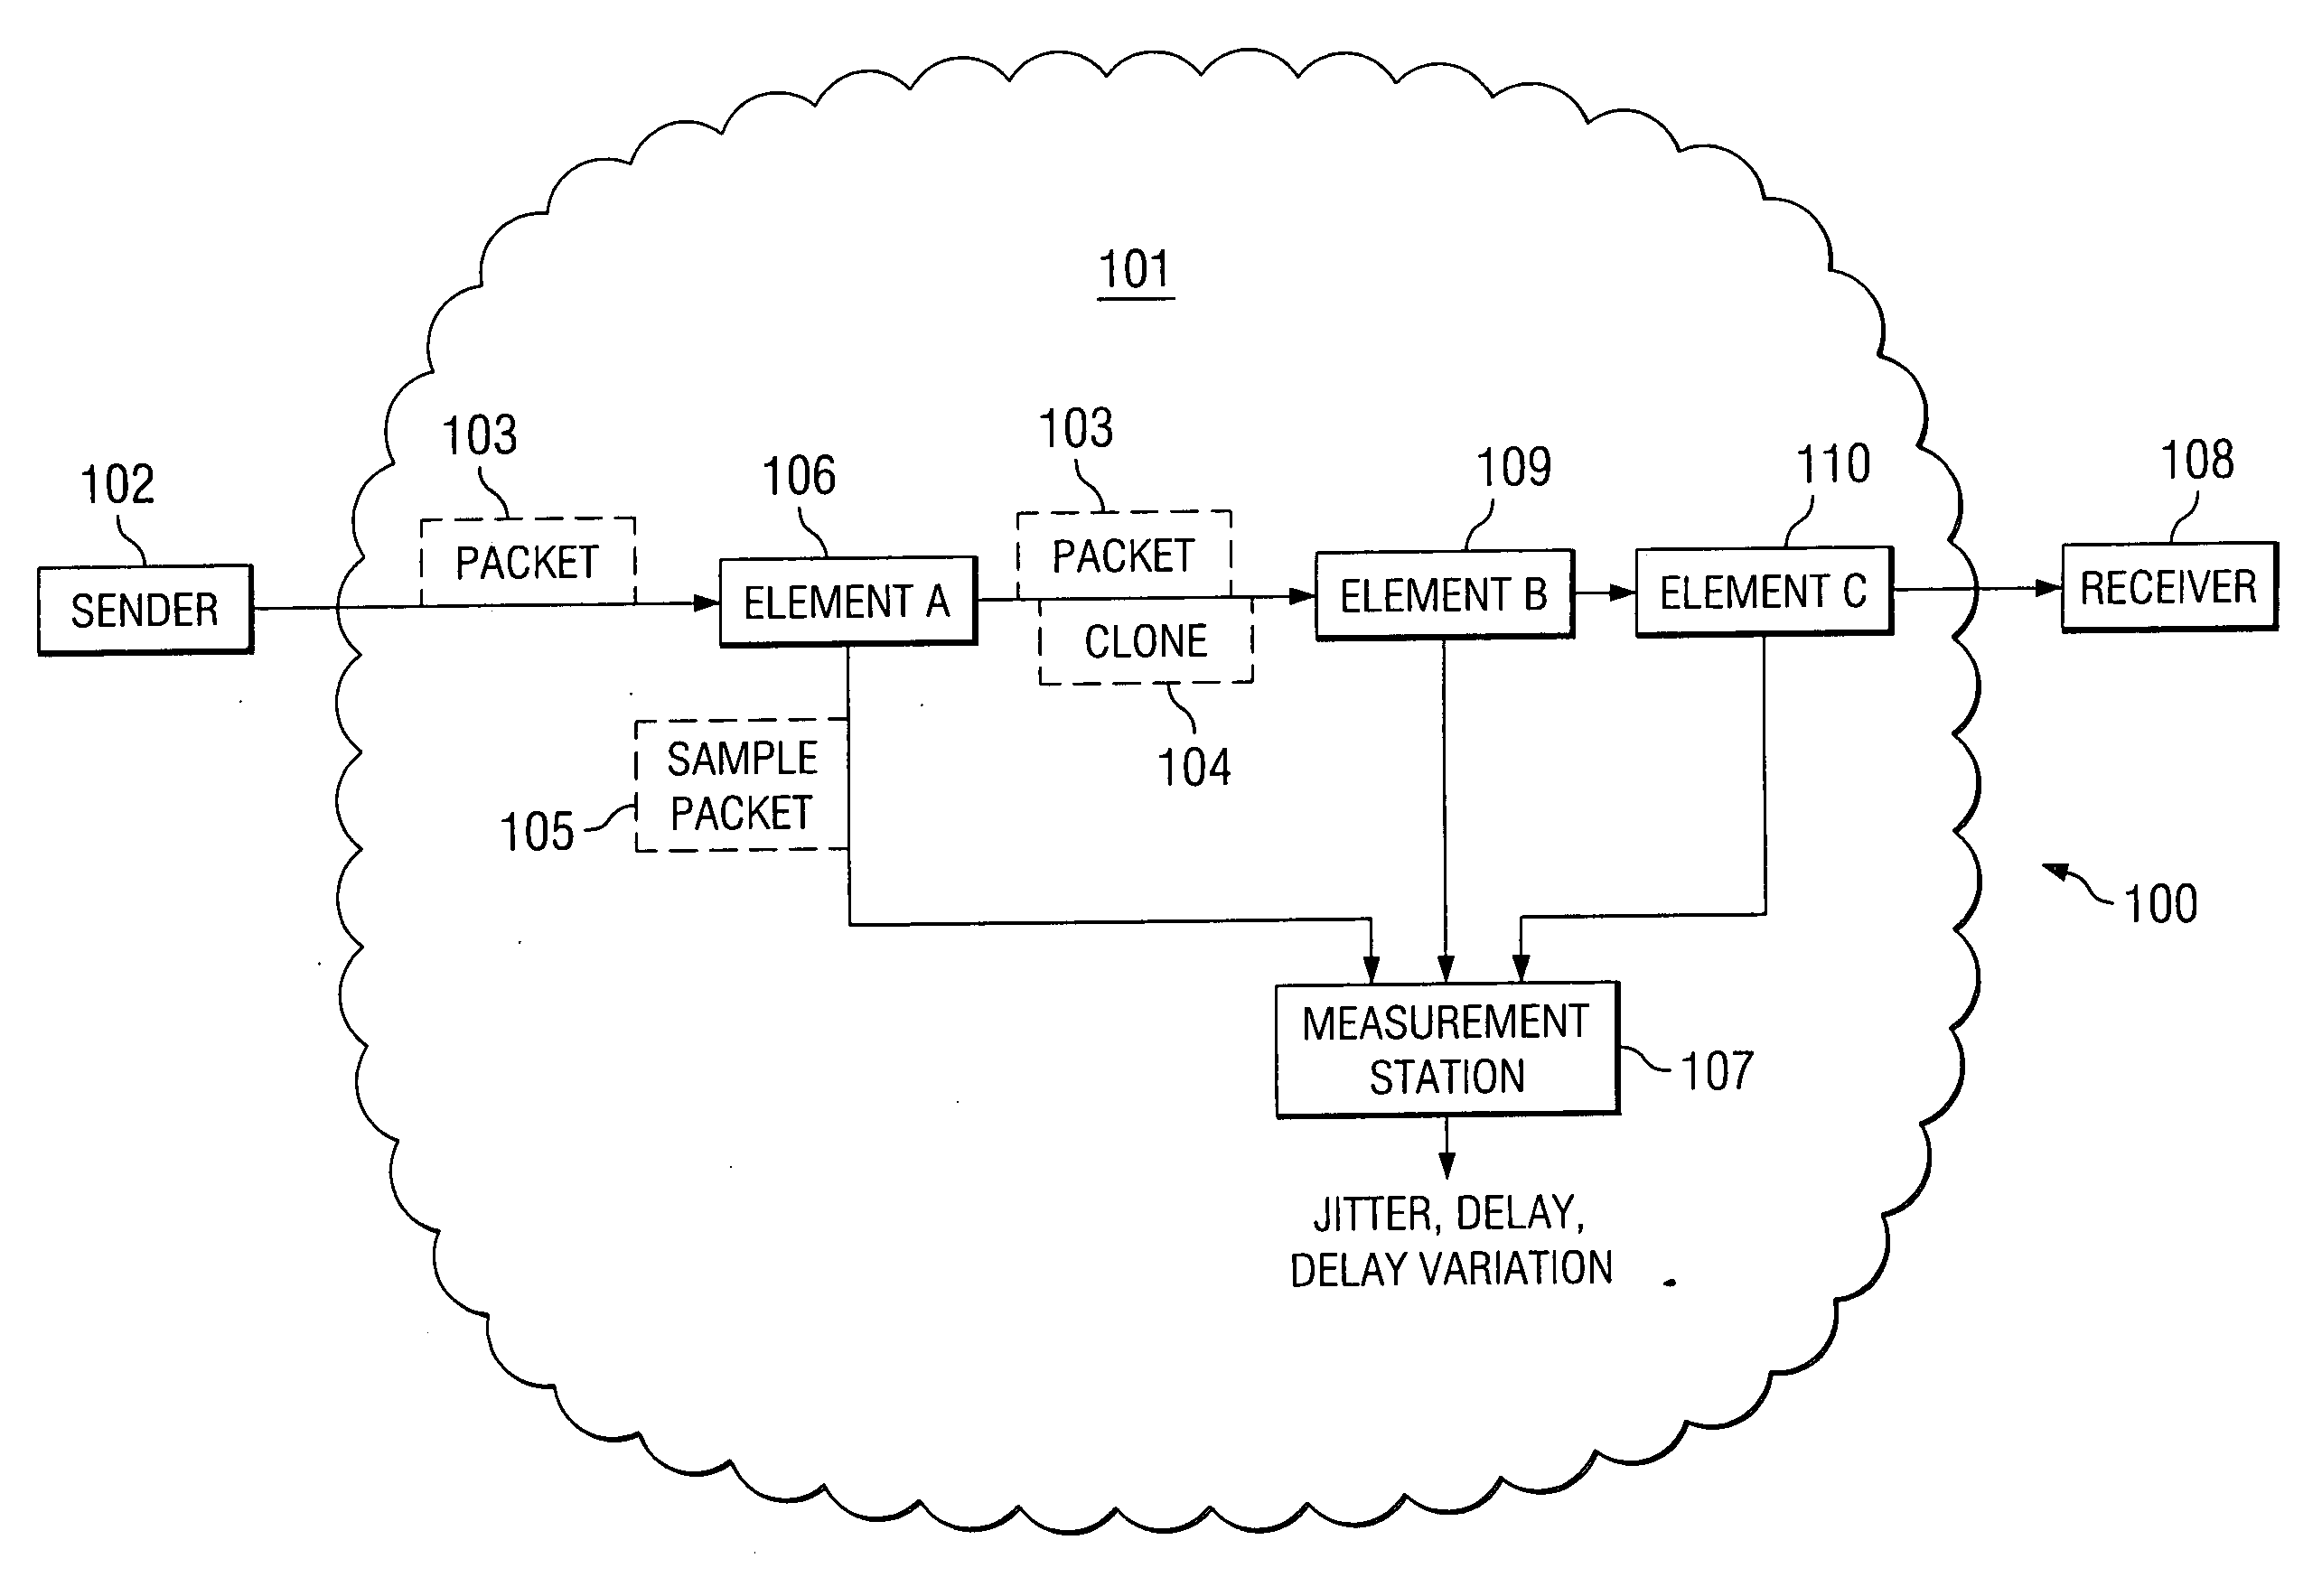 System and method for measuring network performance using real network traffic